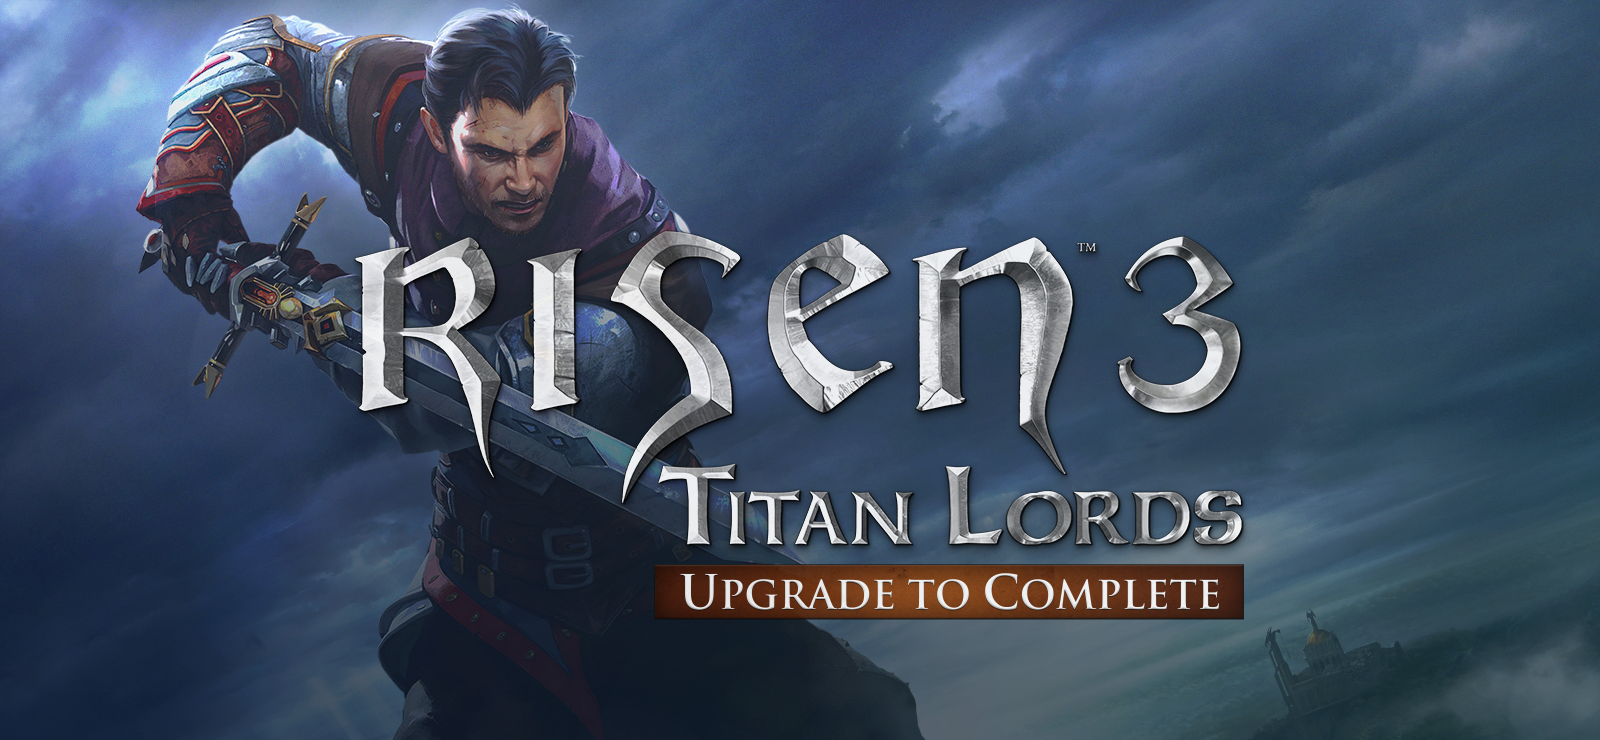 Risen 3: Titan Lords - Upgrade To Complete